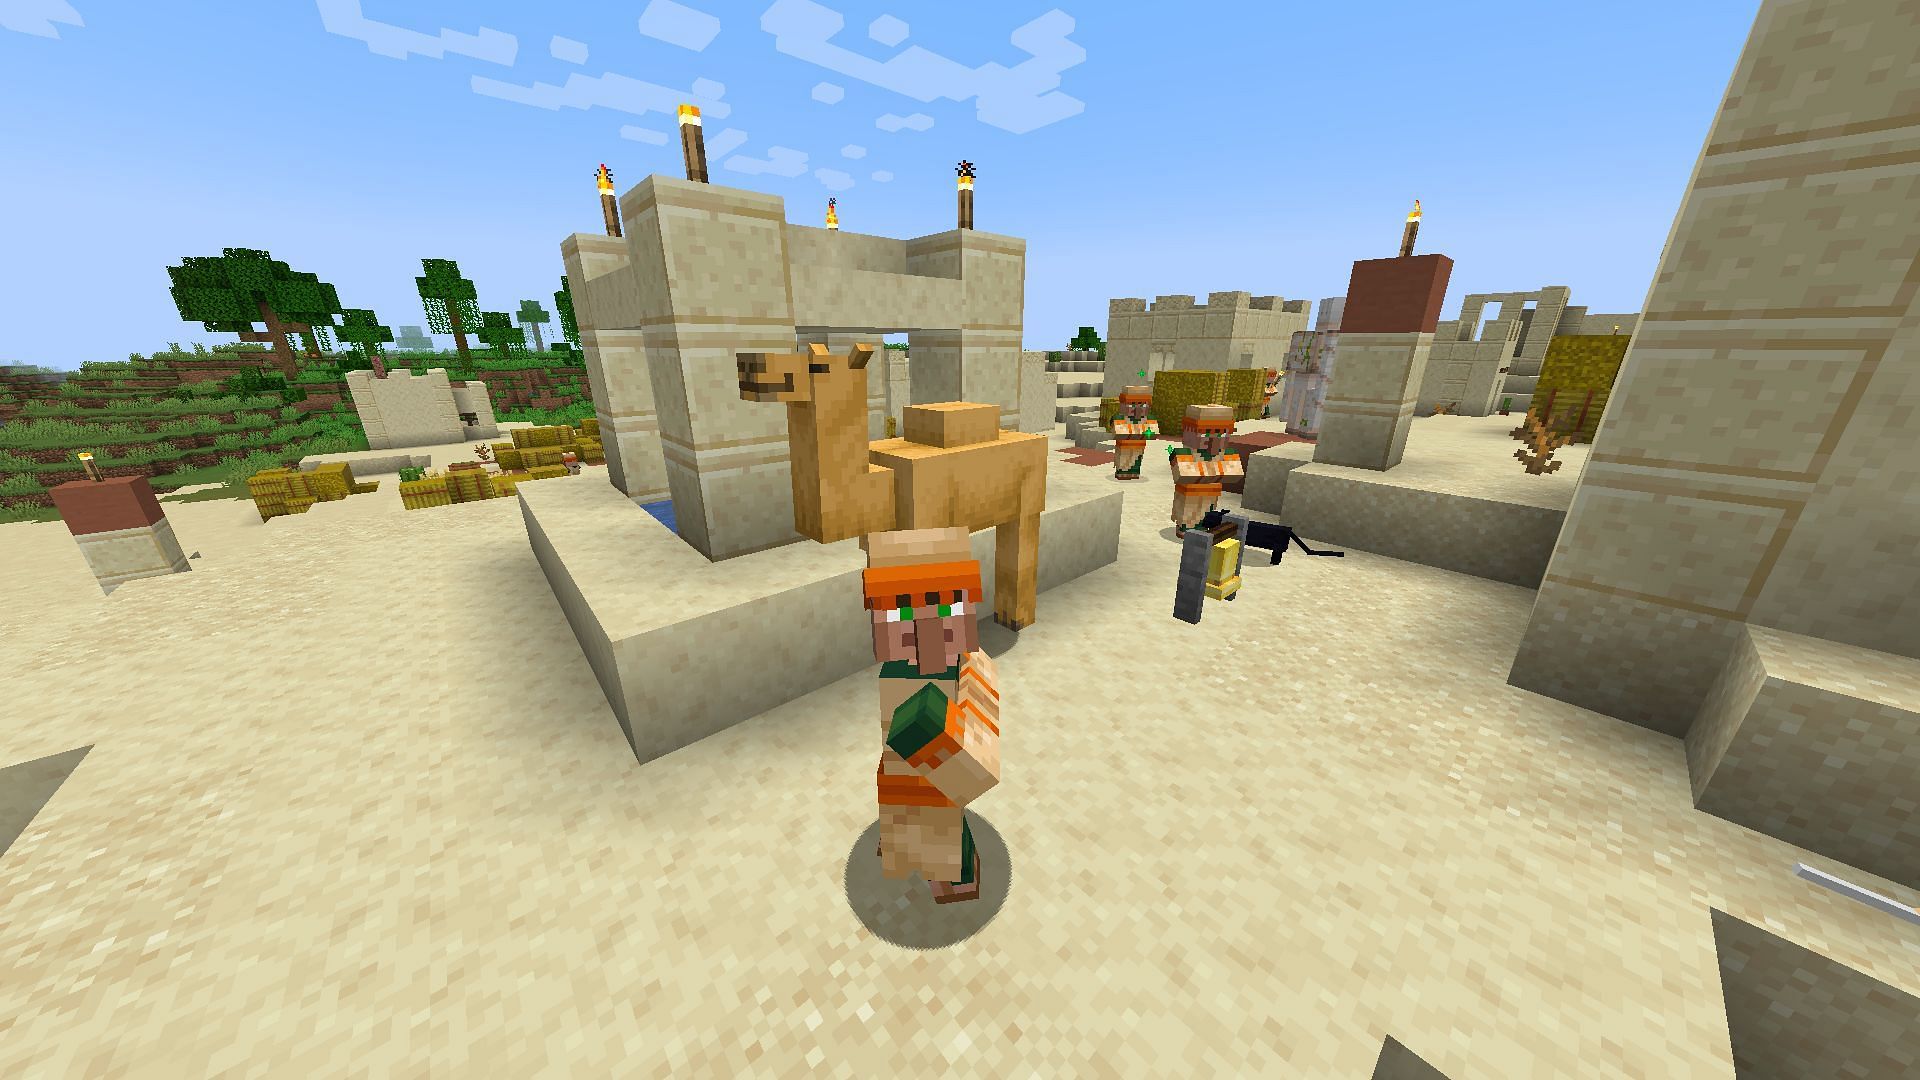 Camels will only spawn naturally in desert villages in Minecraft (Image via Mojang)